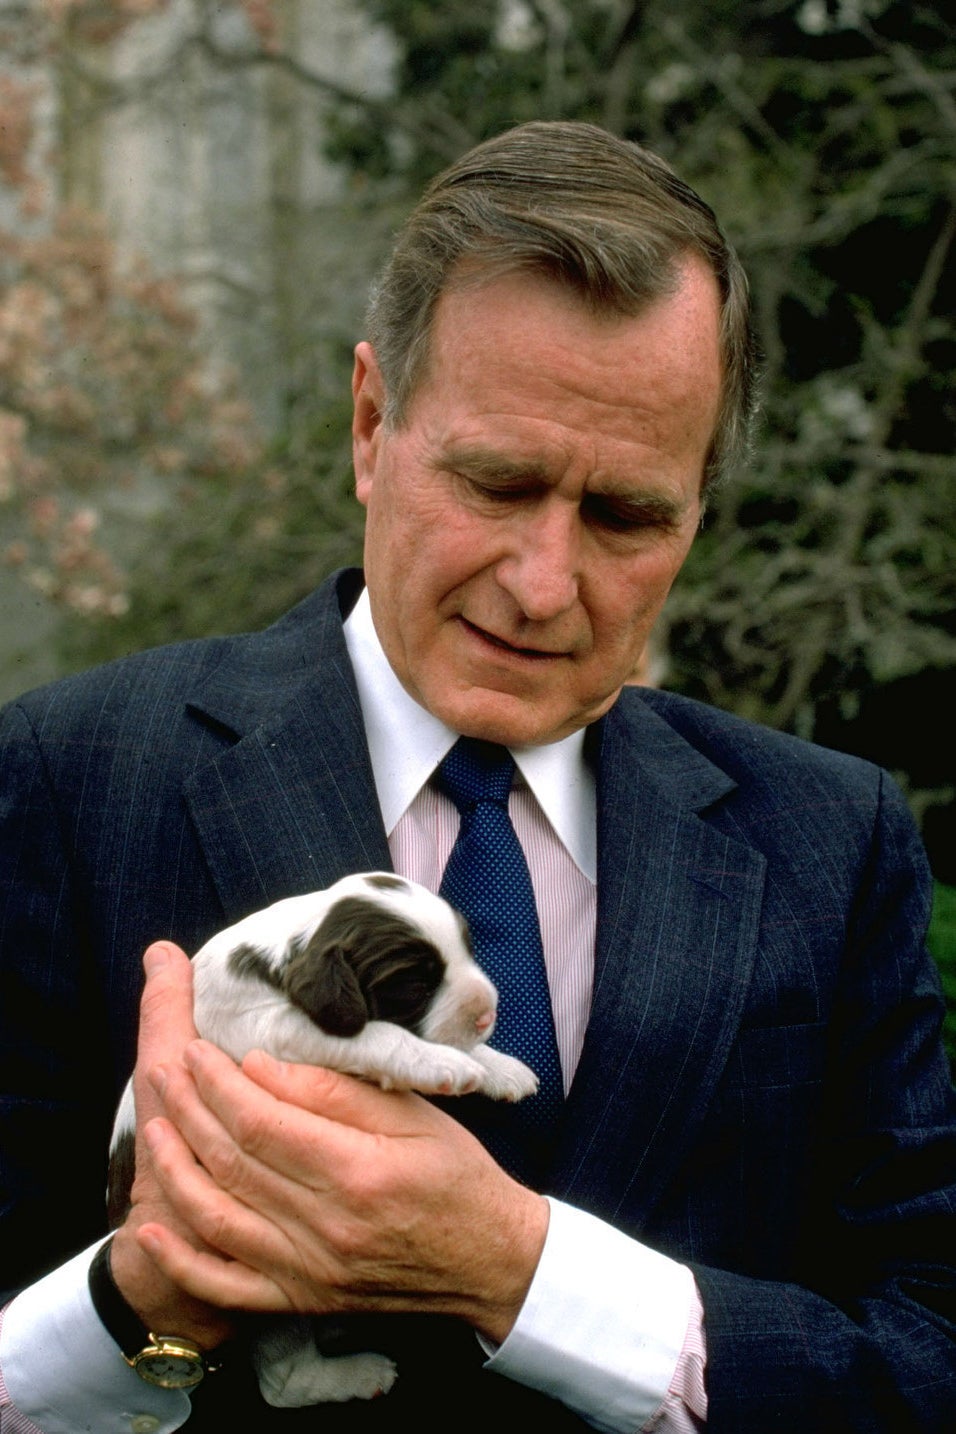 25 Adorable Presidential Pet Photos That Will Melt Your Heart